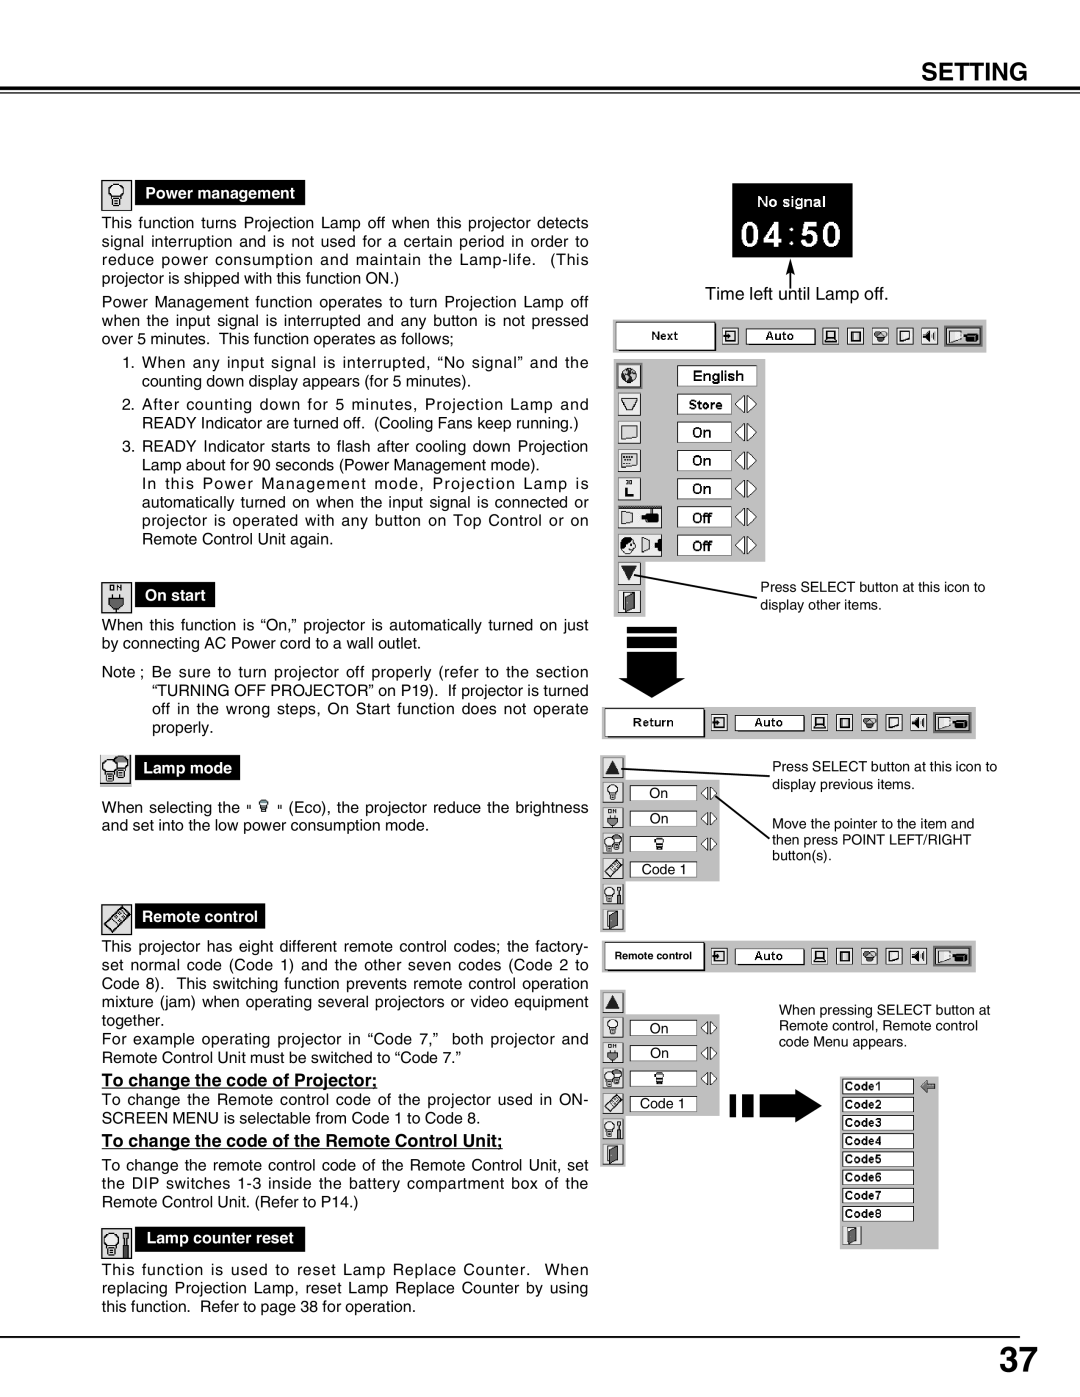 Sanyo PLC-XT16, PLC-XT11 owner manual Setting, Time left until Lamp off, To change the code of Projector 